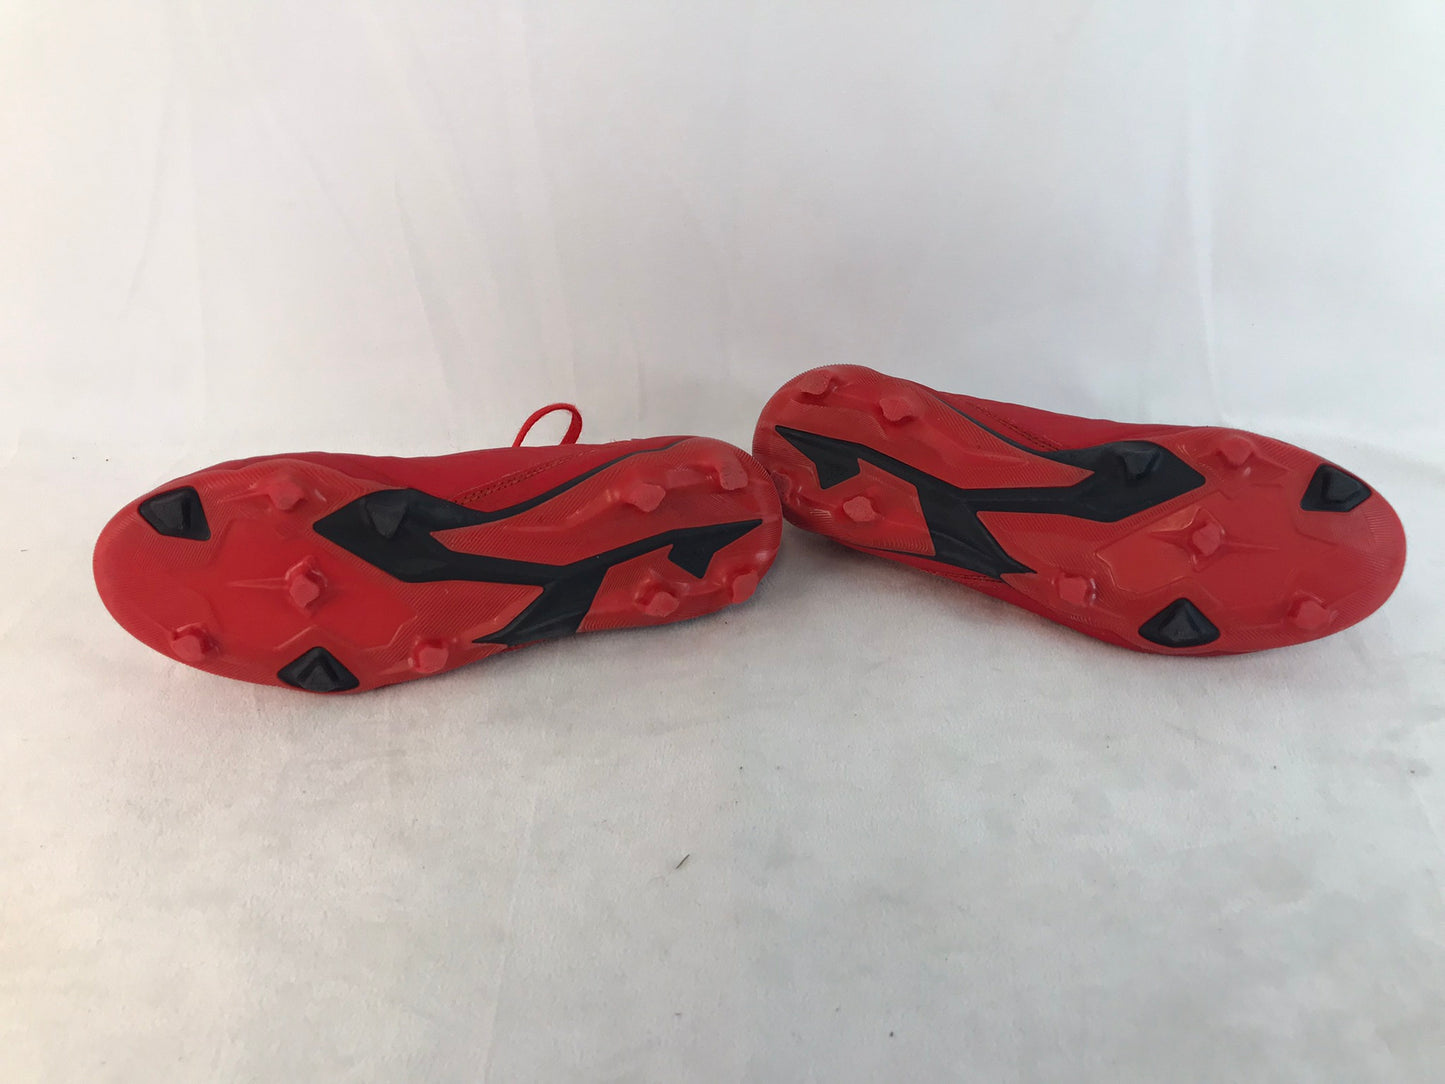 Soccer Shoes Cleats Child Size 3.5 Nike Preditor Red Orange Minor Marks